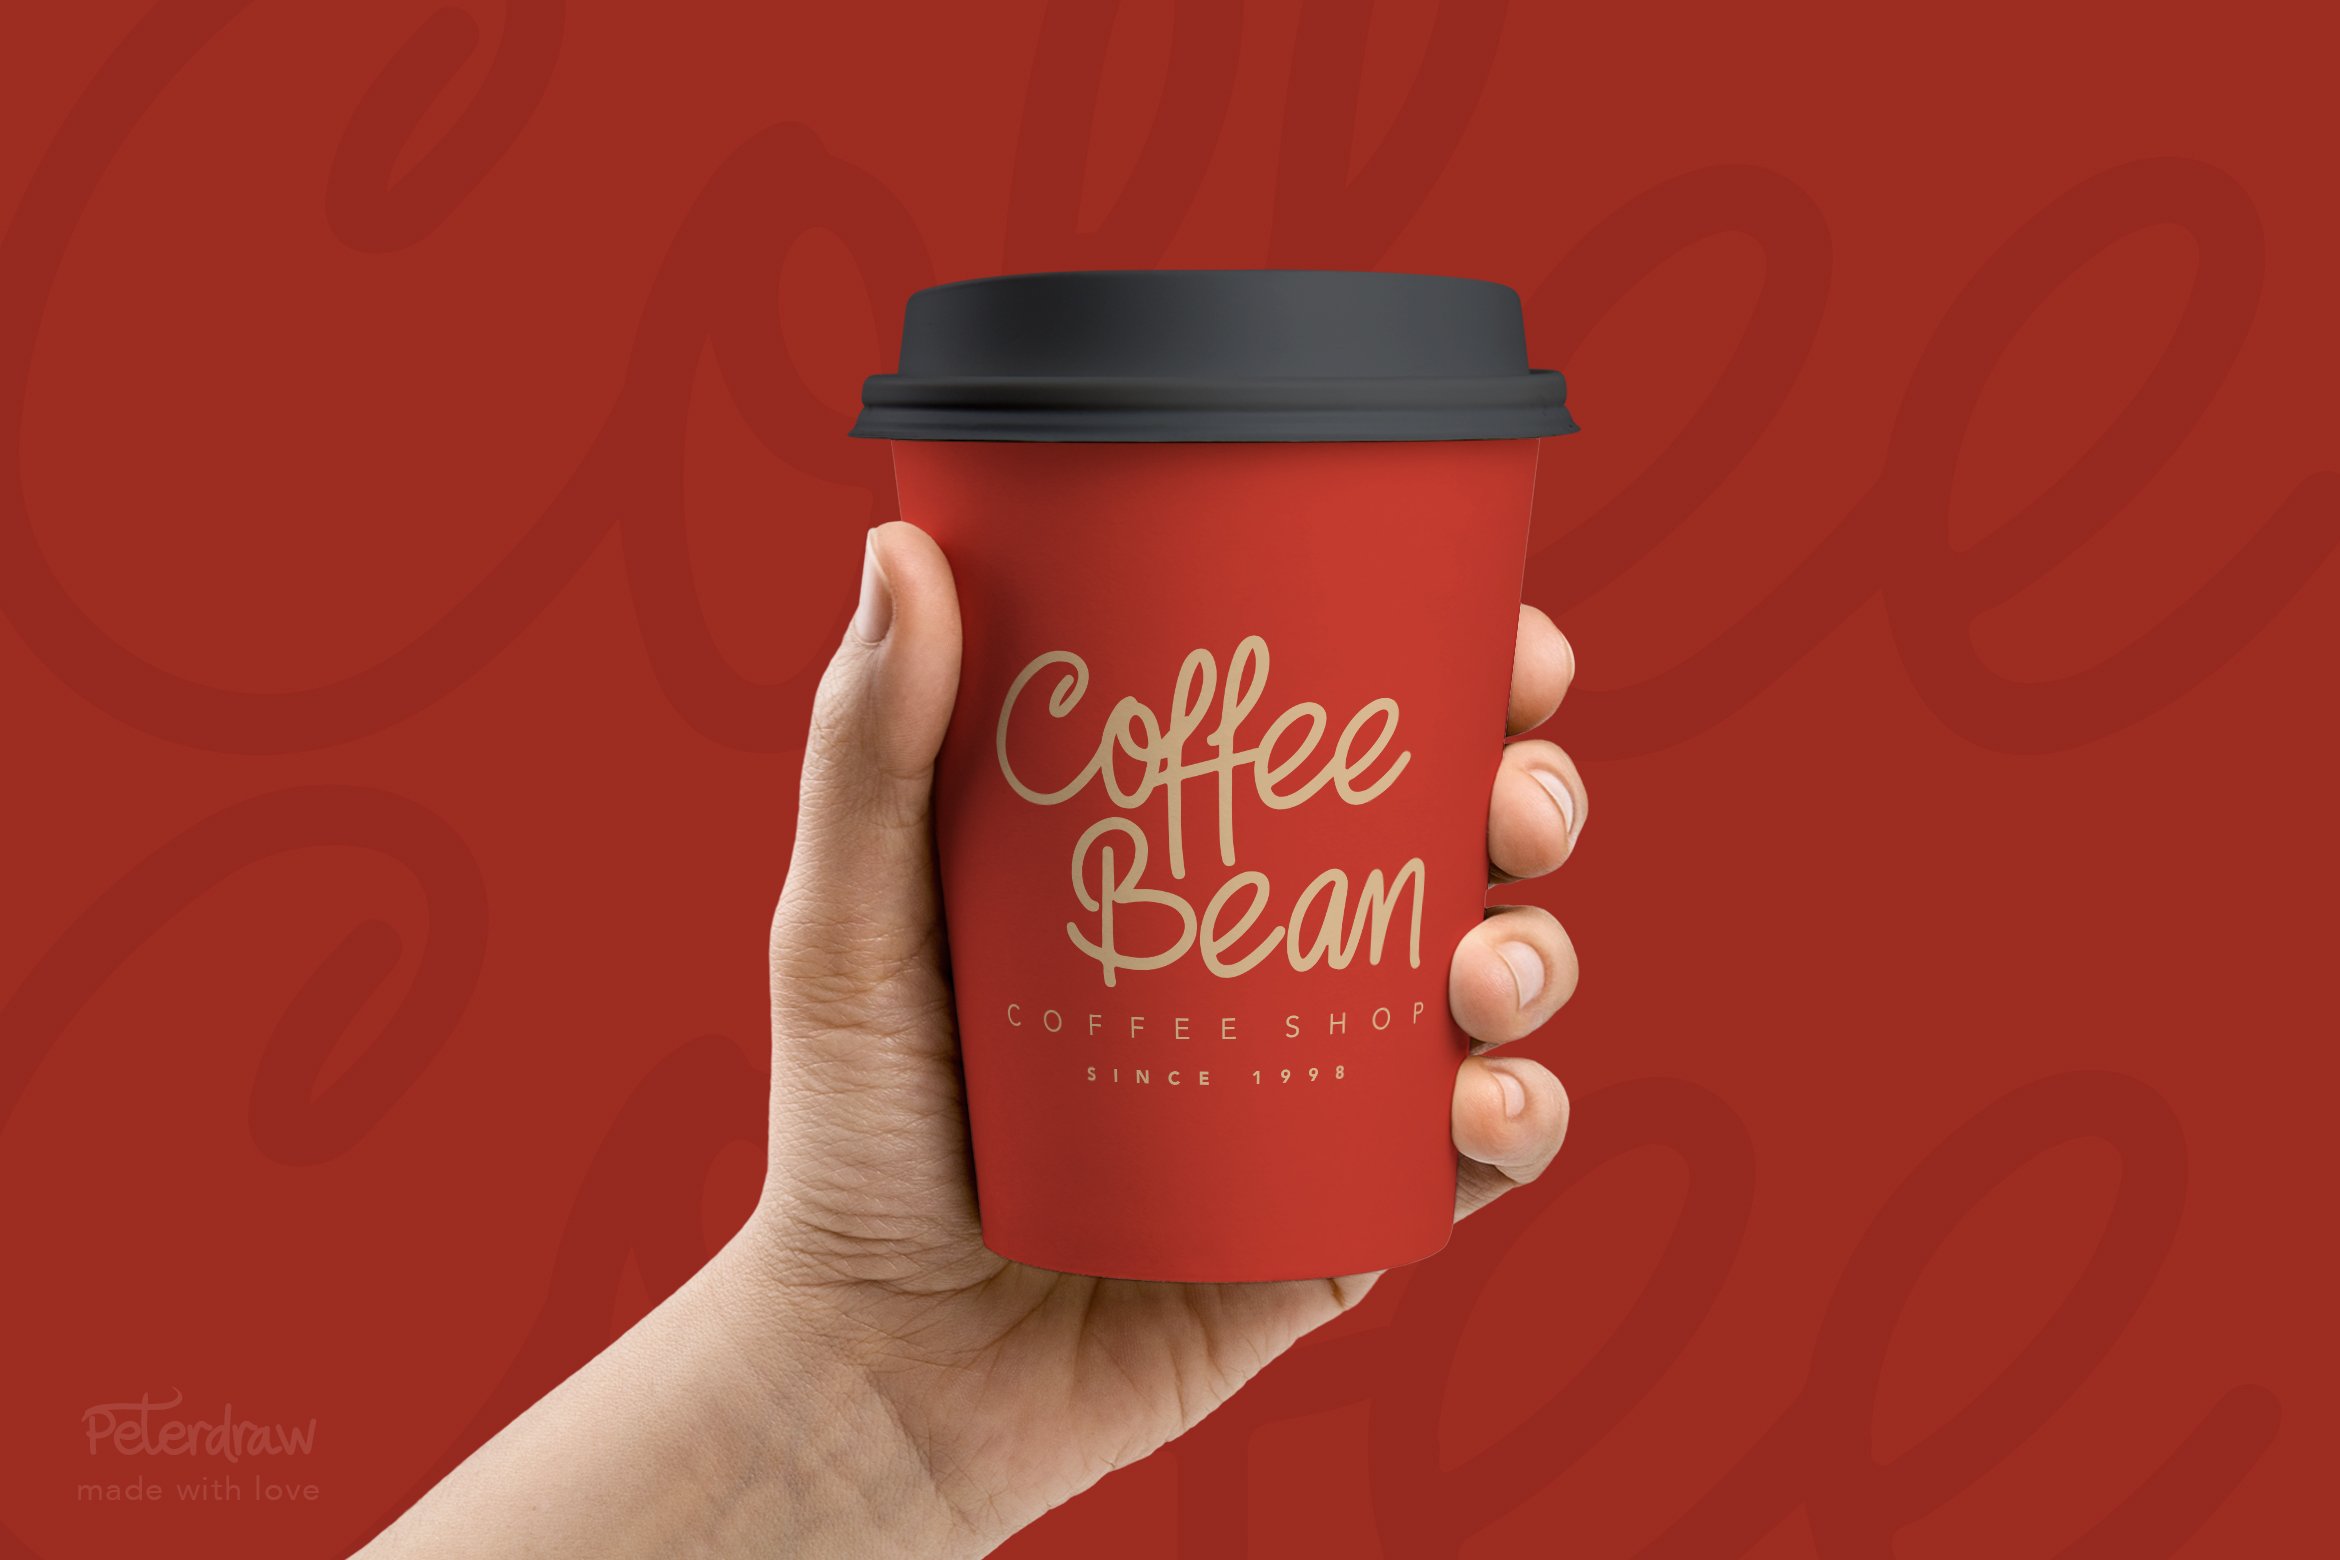 Red matte cup for the coffee on a red background.